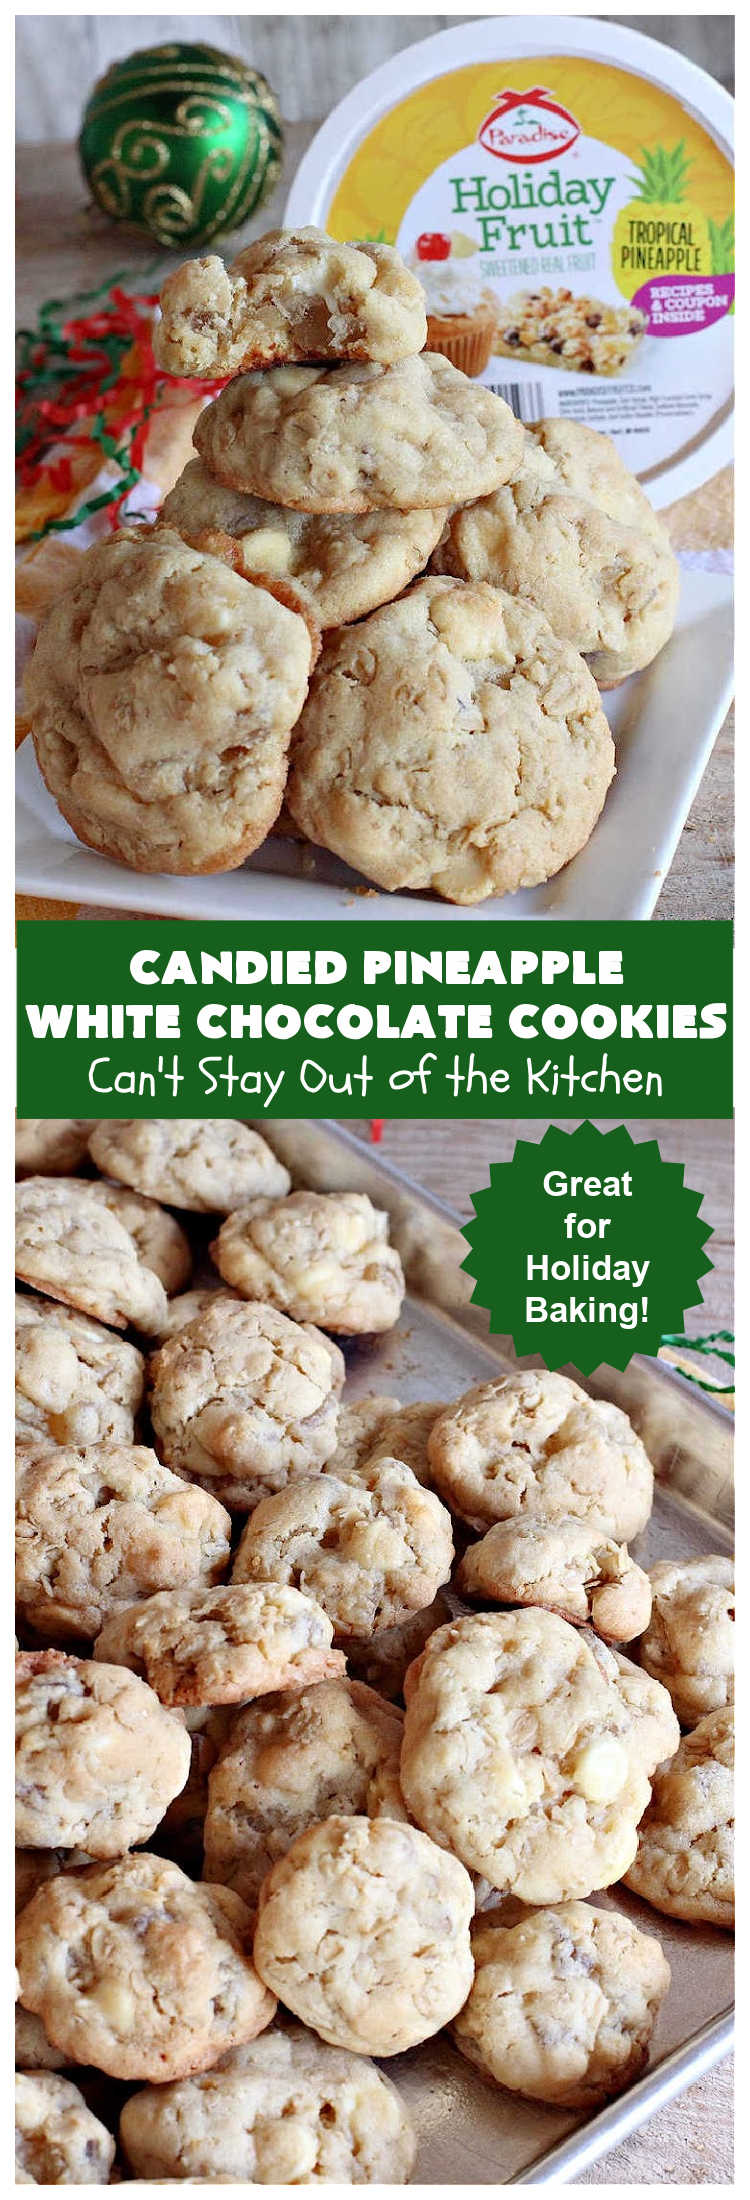 Candied Pineapple White Chocolate Cookies | Can't Stay Out of the Kitchen